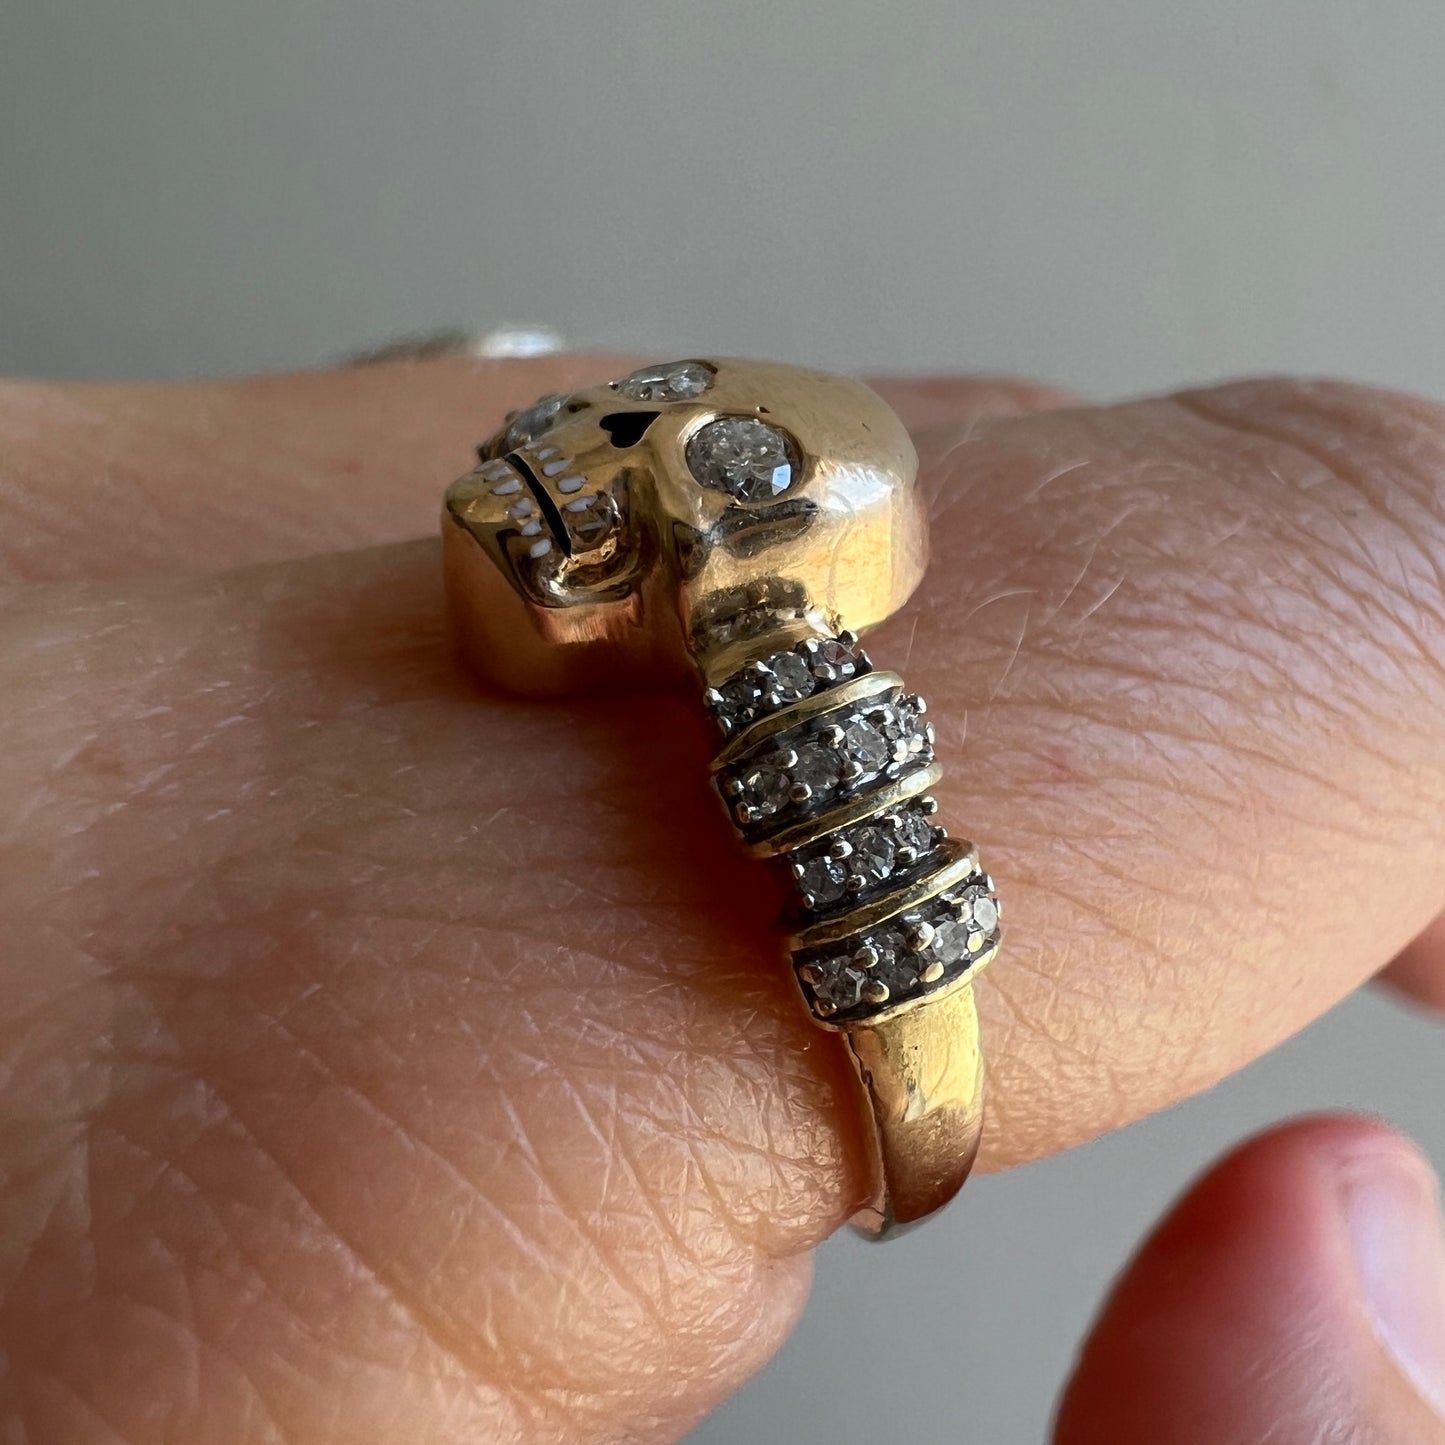 reimagined V I N T A G E // memento mori grin / solid 10k and diamond fraternal skull pin conversion ring / size 7